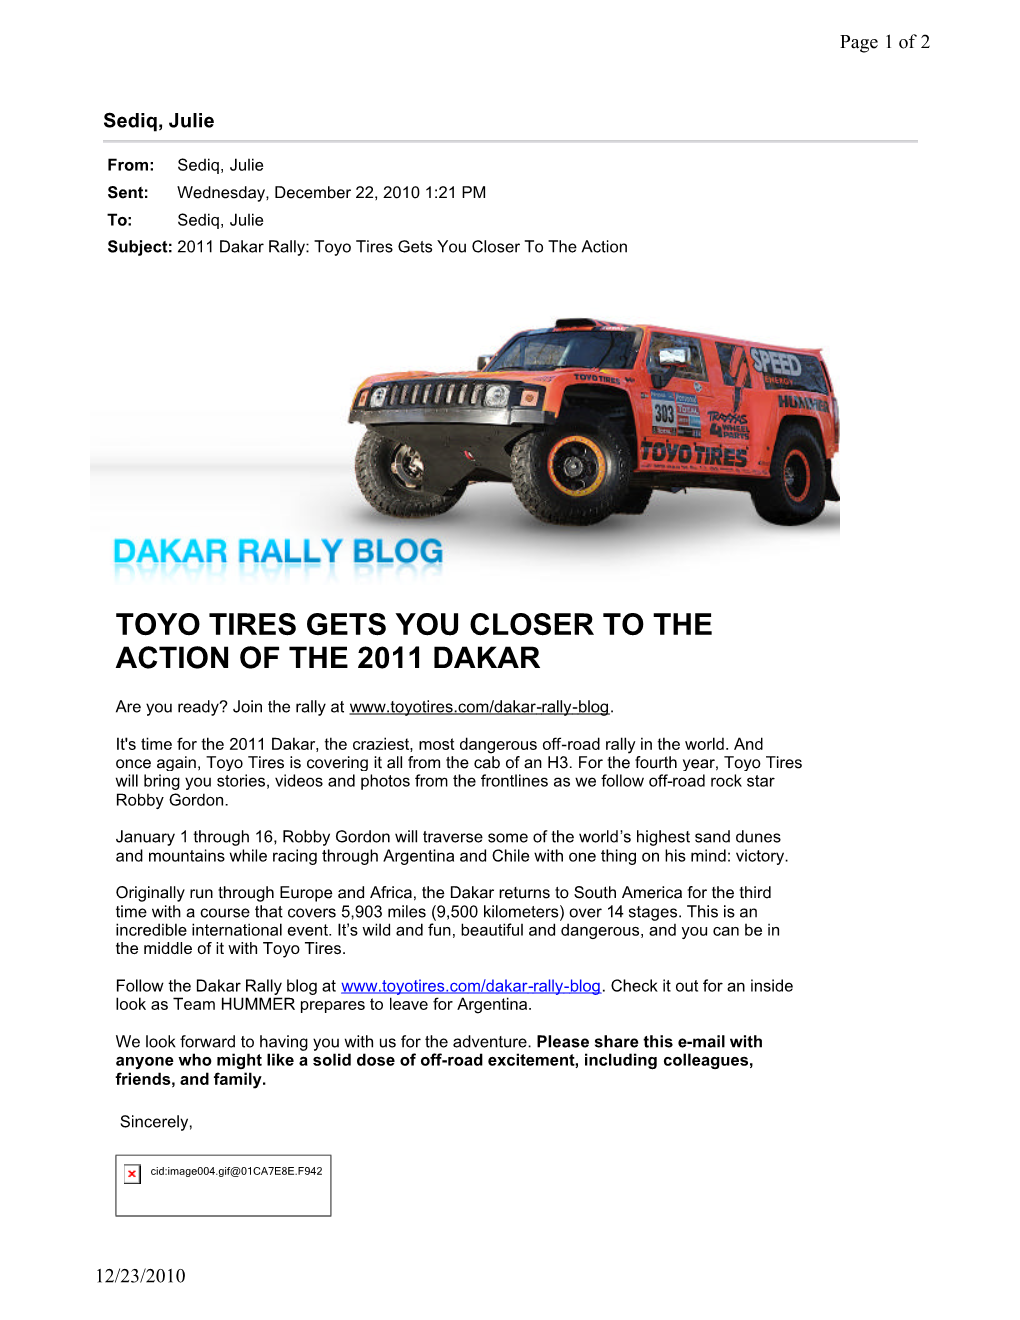 Toyo Tires Gets You Closer to the Action of the 2011 Dakar